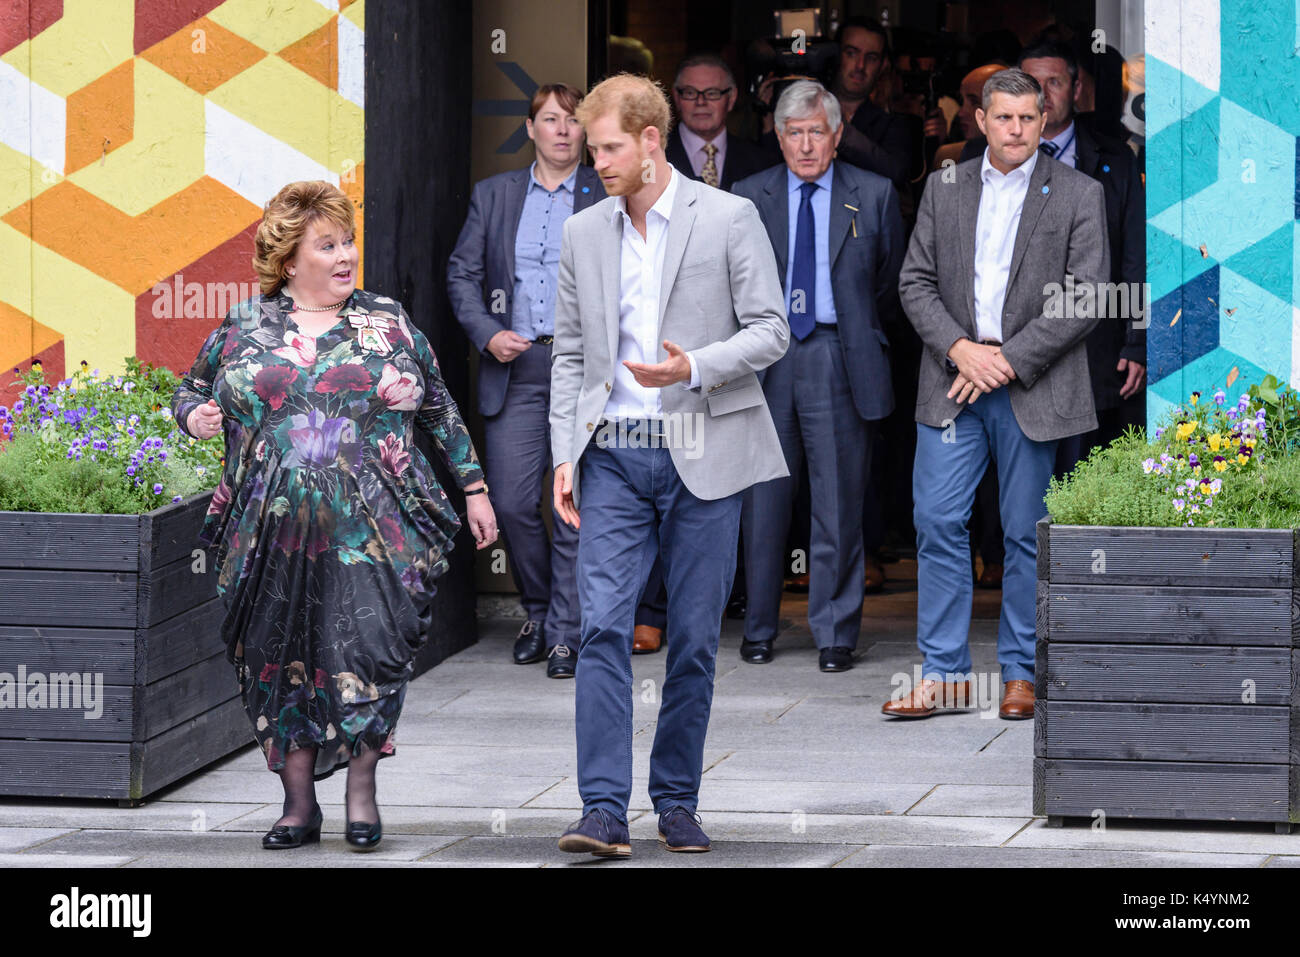 Belfast, Northern Ireland. 07/09/2017 -  Prince Harry leaves the MAC with Lord Lieutenant of the City of Belfast, Fionnula Jay-O'Boyle, before a walkabout in Belfast on his first Northern Ireland visit. Stock Photo